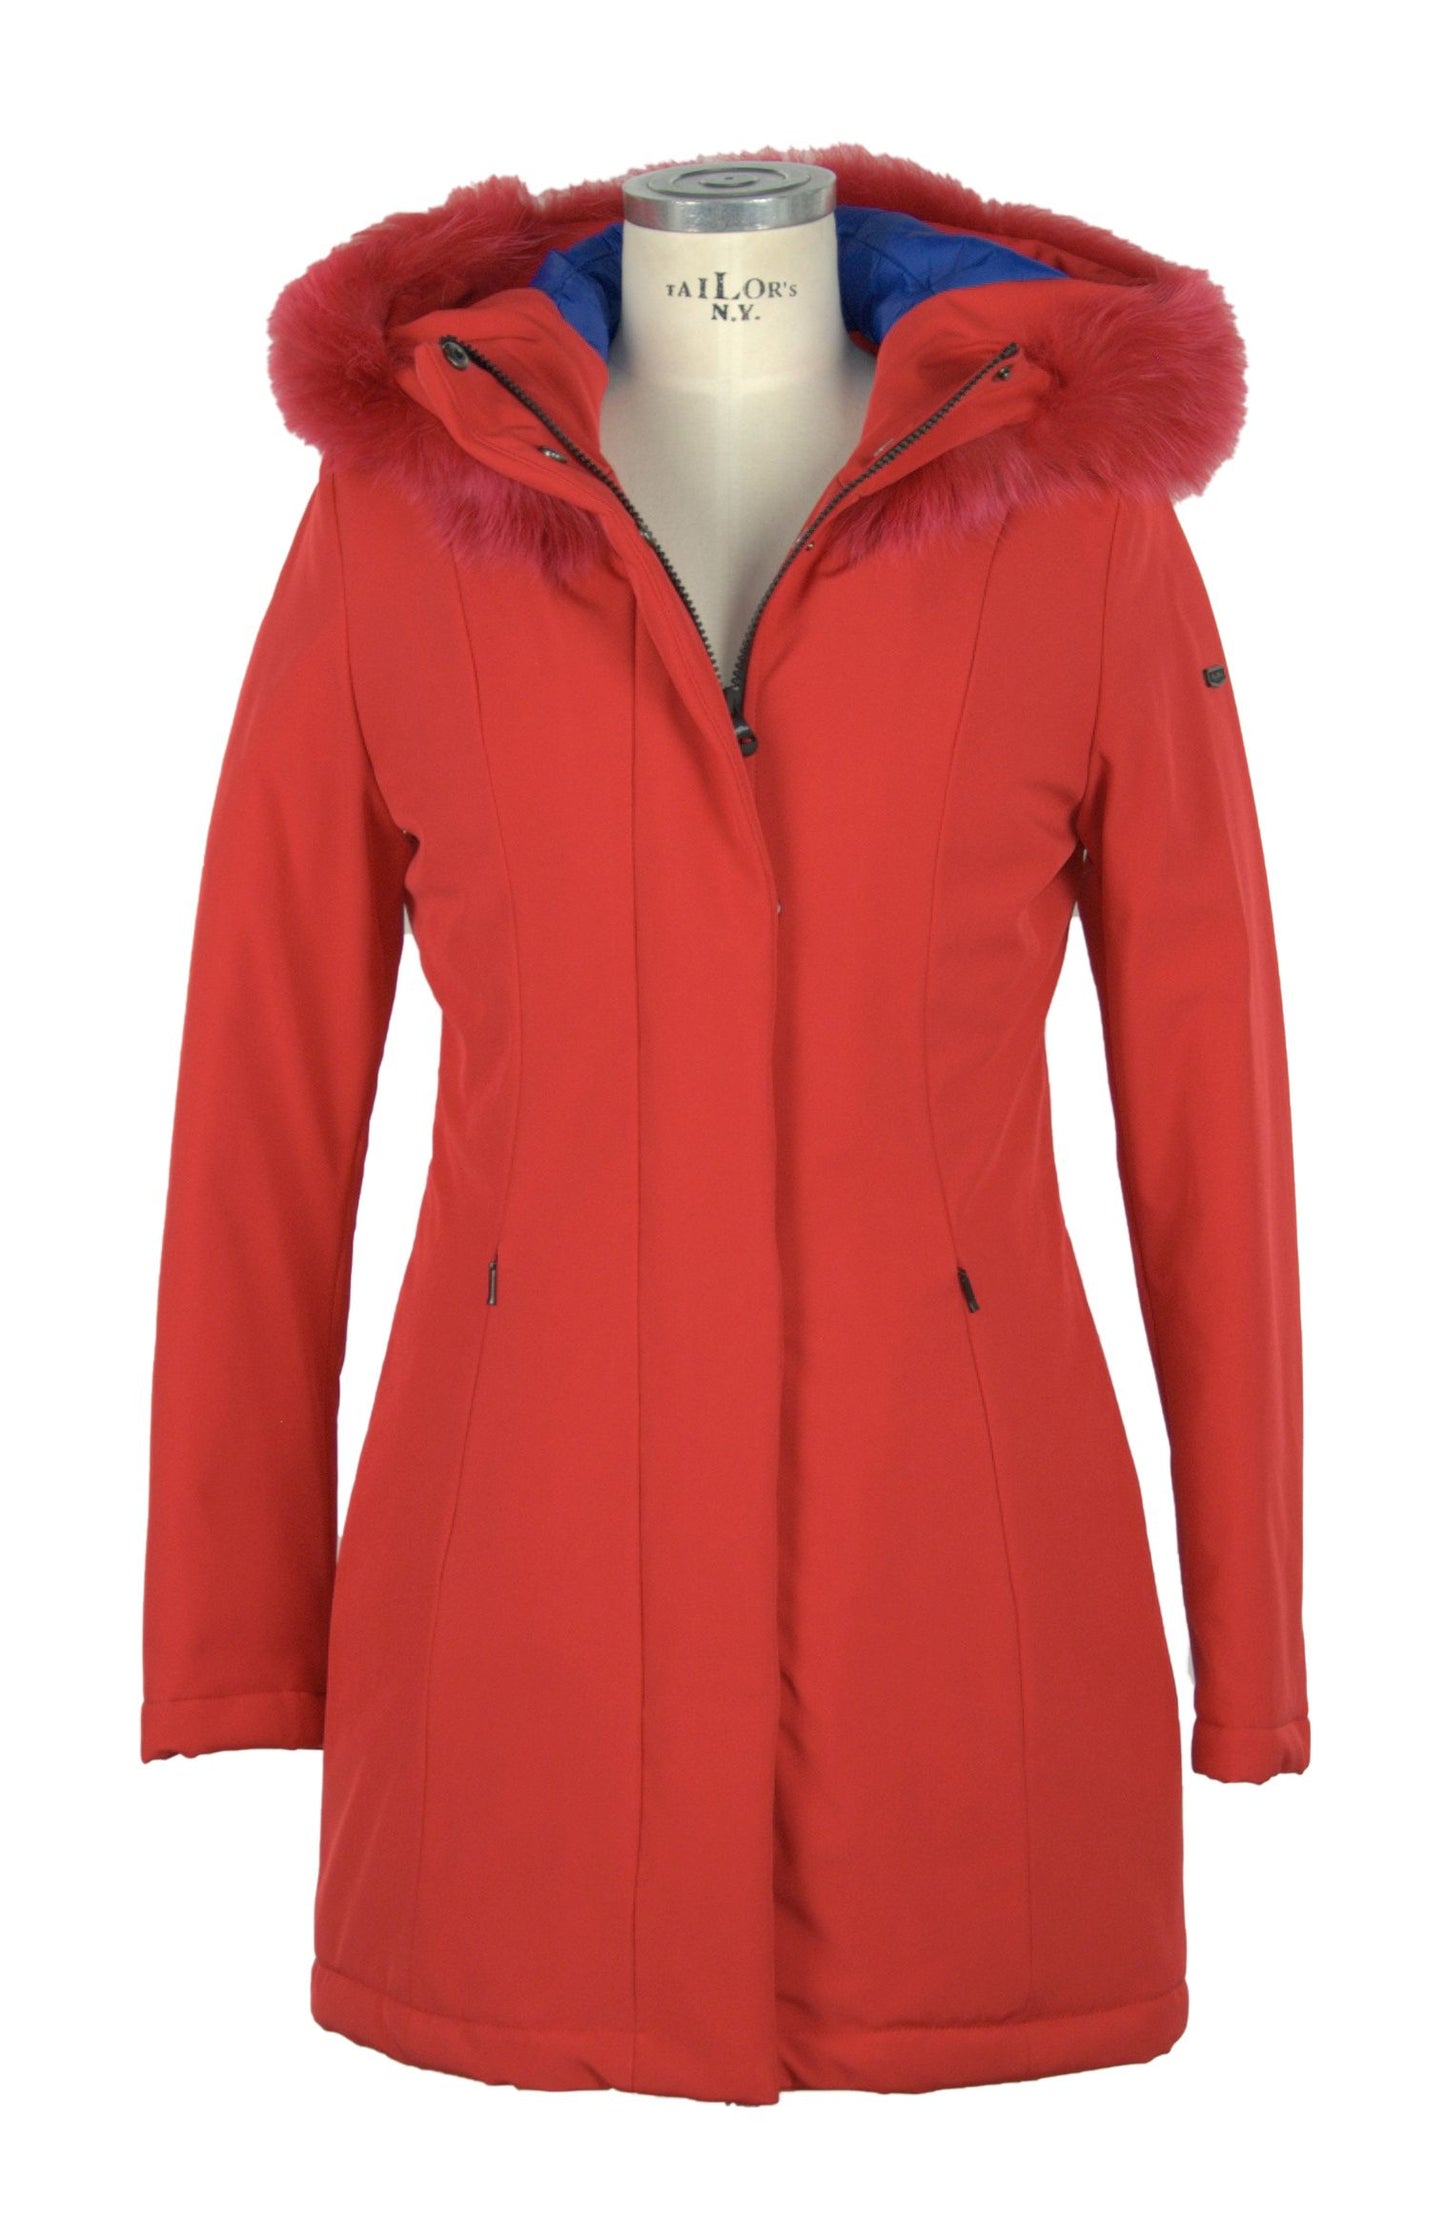 Refrigiwear Chic Red Luxury Winter Parka with Eco-Friendly Insulation